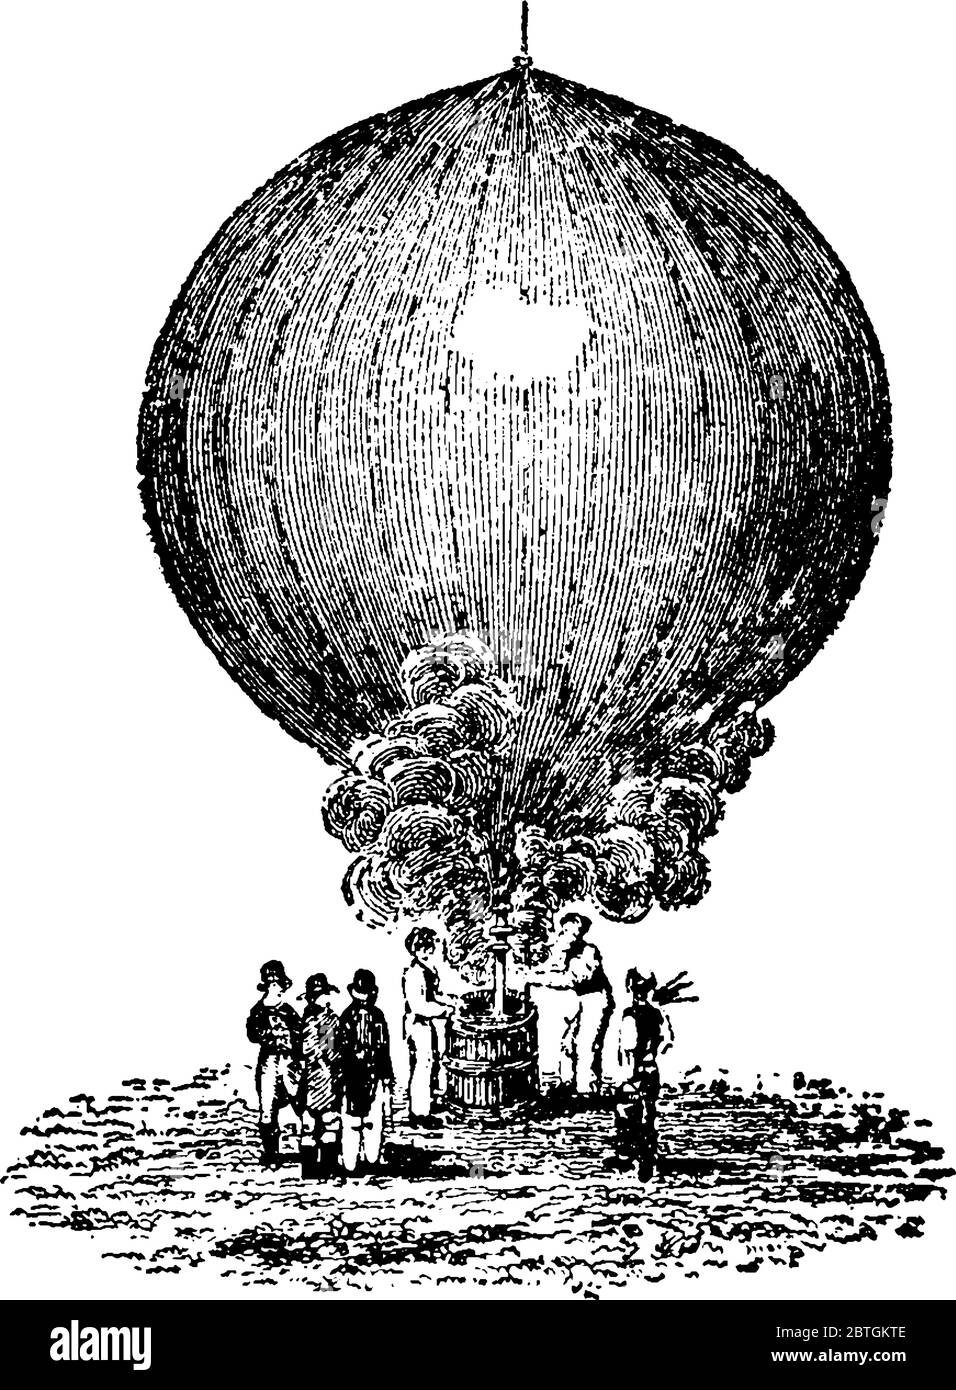 A typical representation of a hot air balloon, lighter-than-air aircraft, found on the ground and surrounded by men, vintage line drawing or engraving Stock Vector